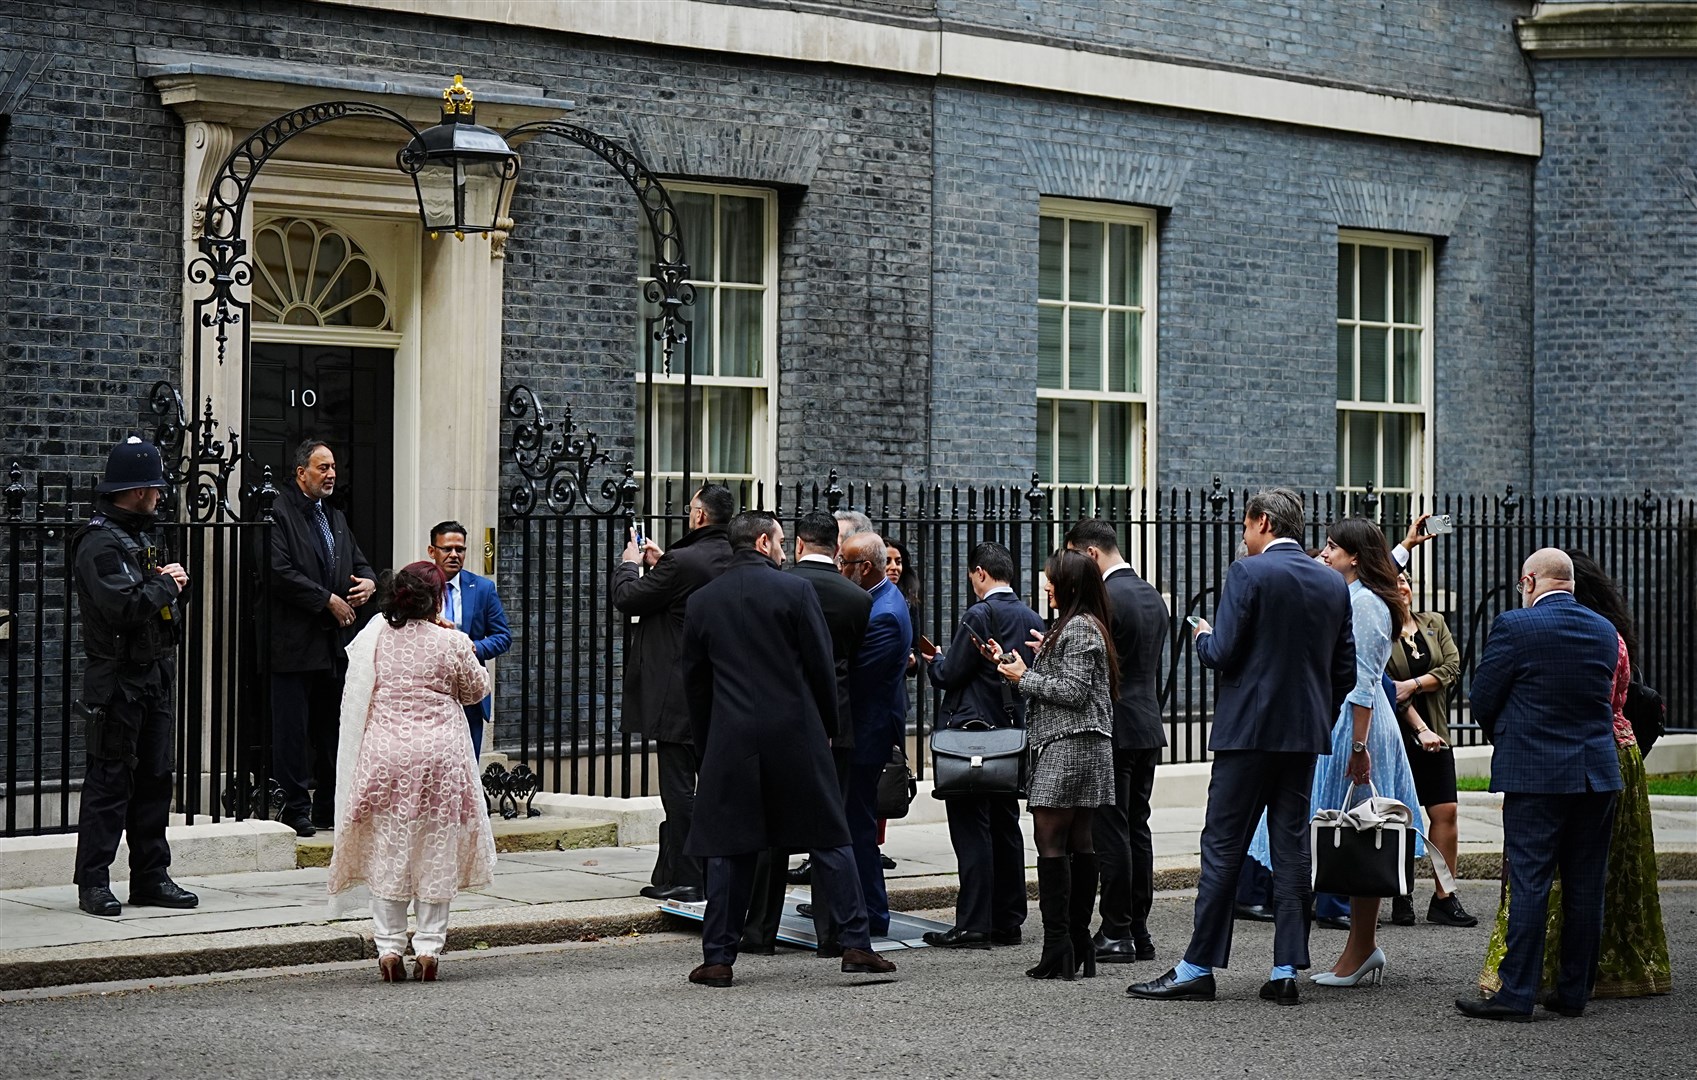 Members of the Muslim community wait to have their picture taken in front of 10 Downing Street’s door as they arrive for an Eid reception (Aaron Chown/PA)